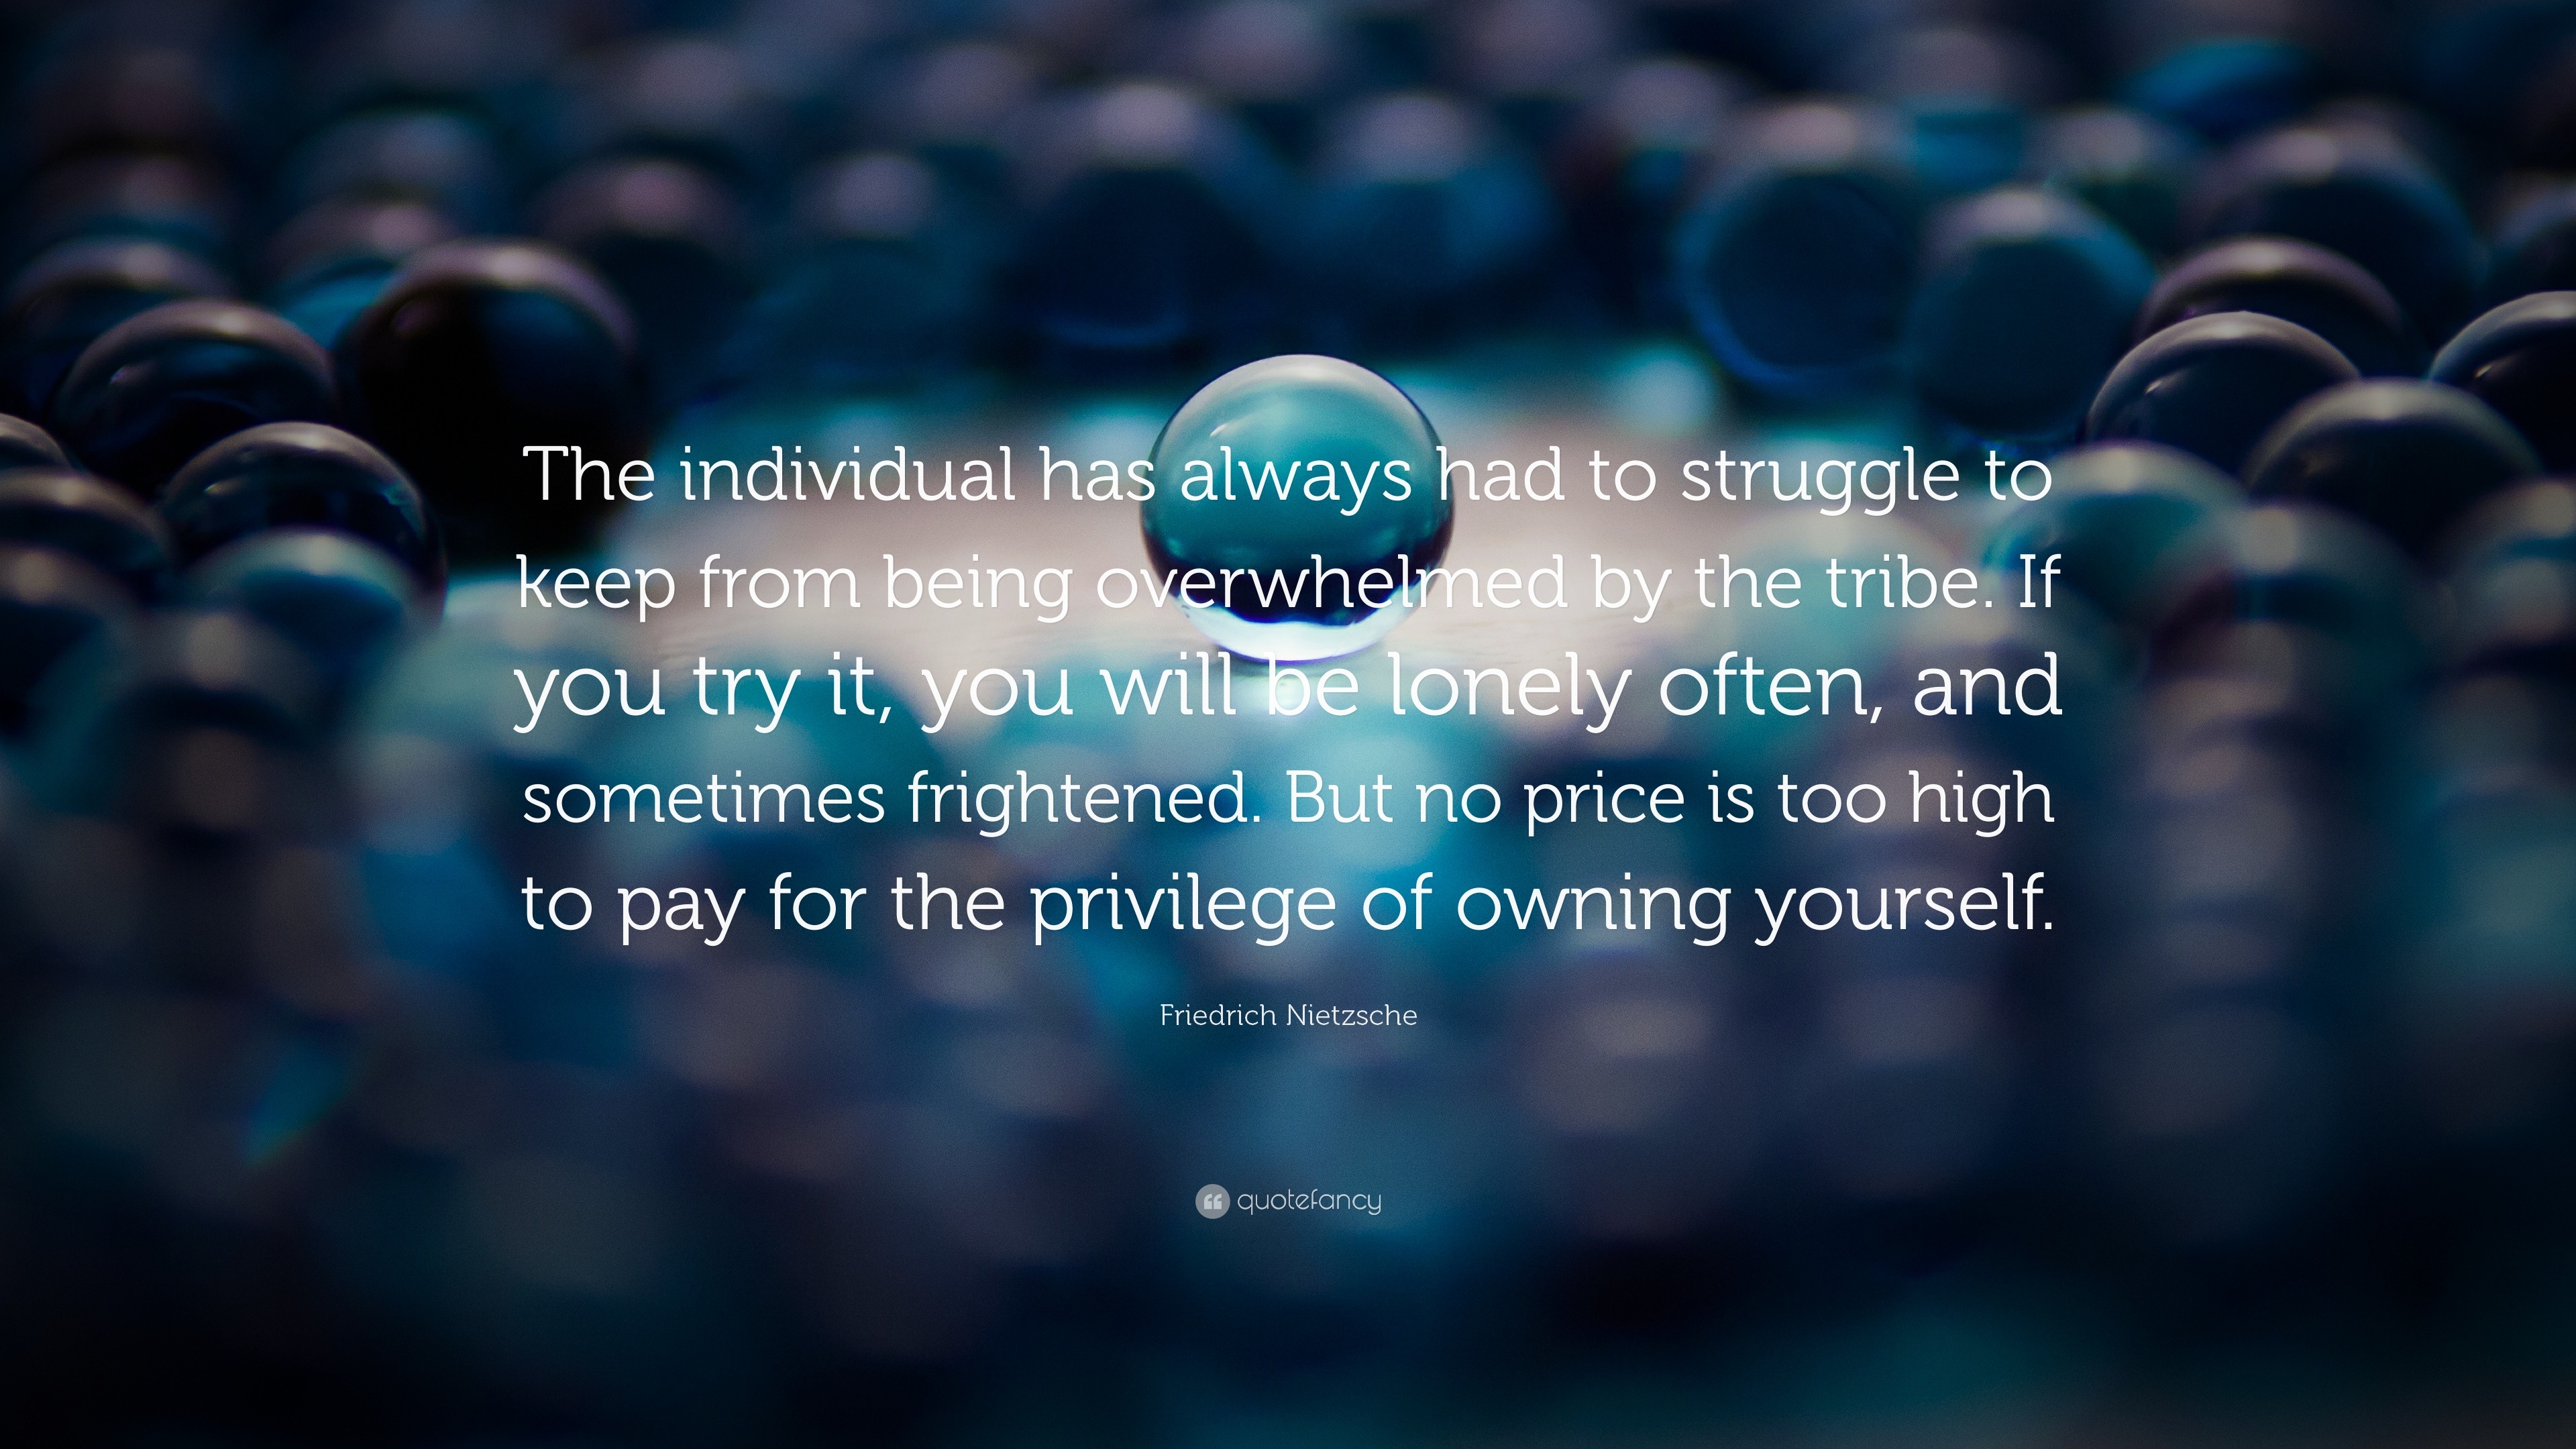 Friedrich Nietzsche Quote: “The individual has always had to struggle